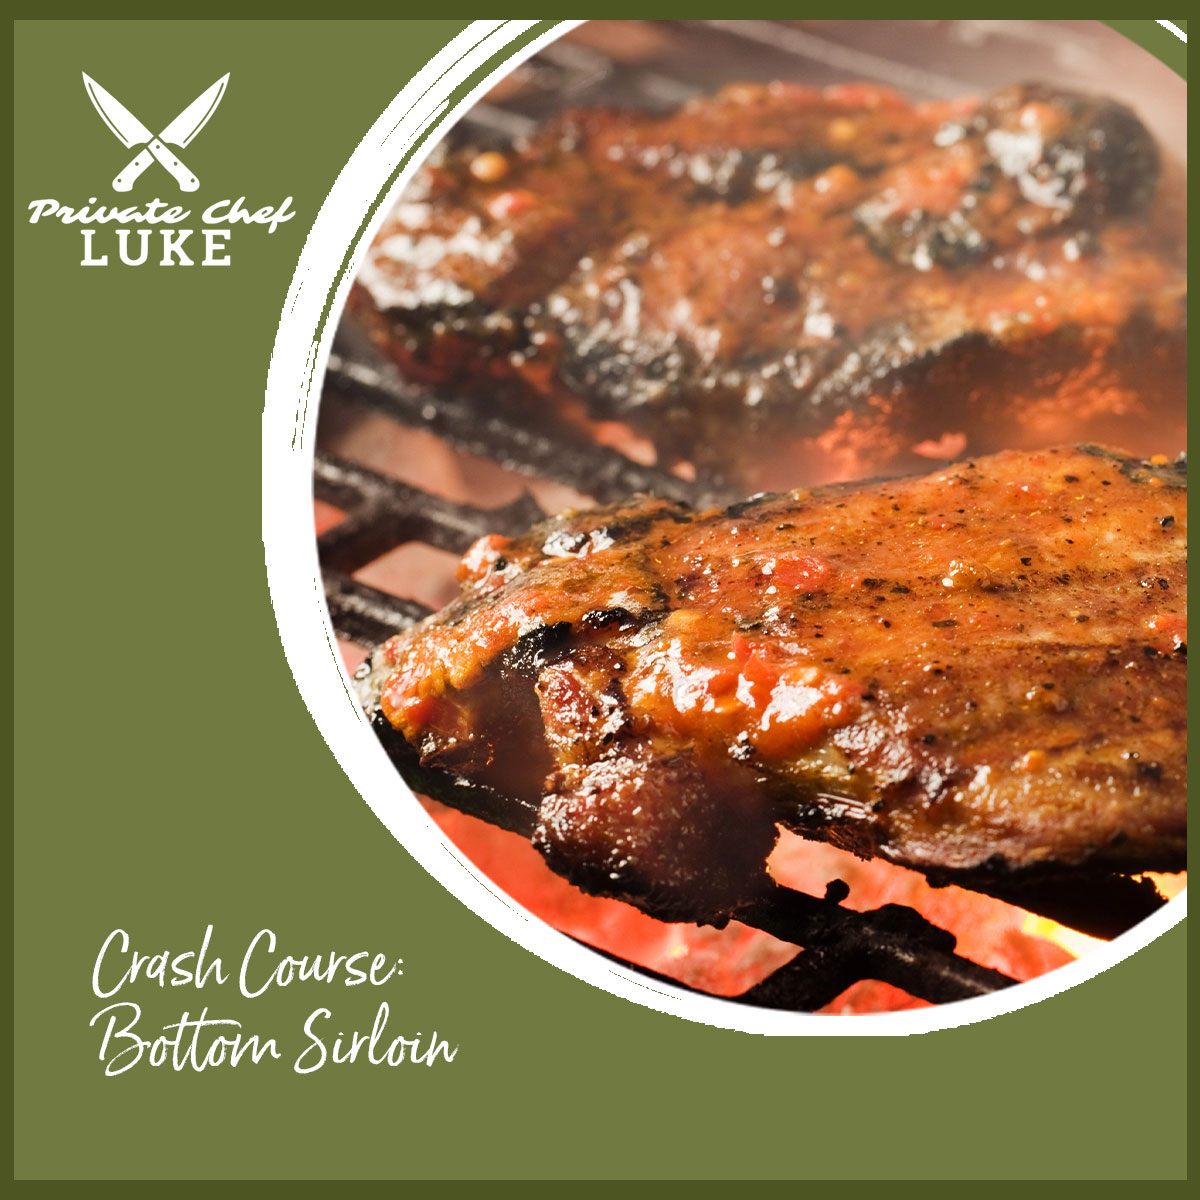 Click to view and download Chef Luke's recipe for Crash Course: Bottom Sirloin.